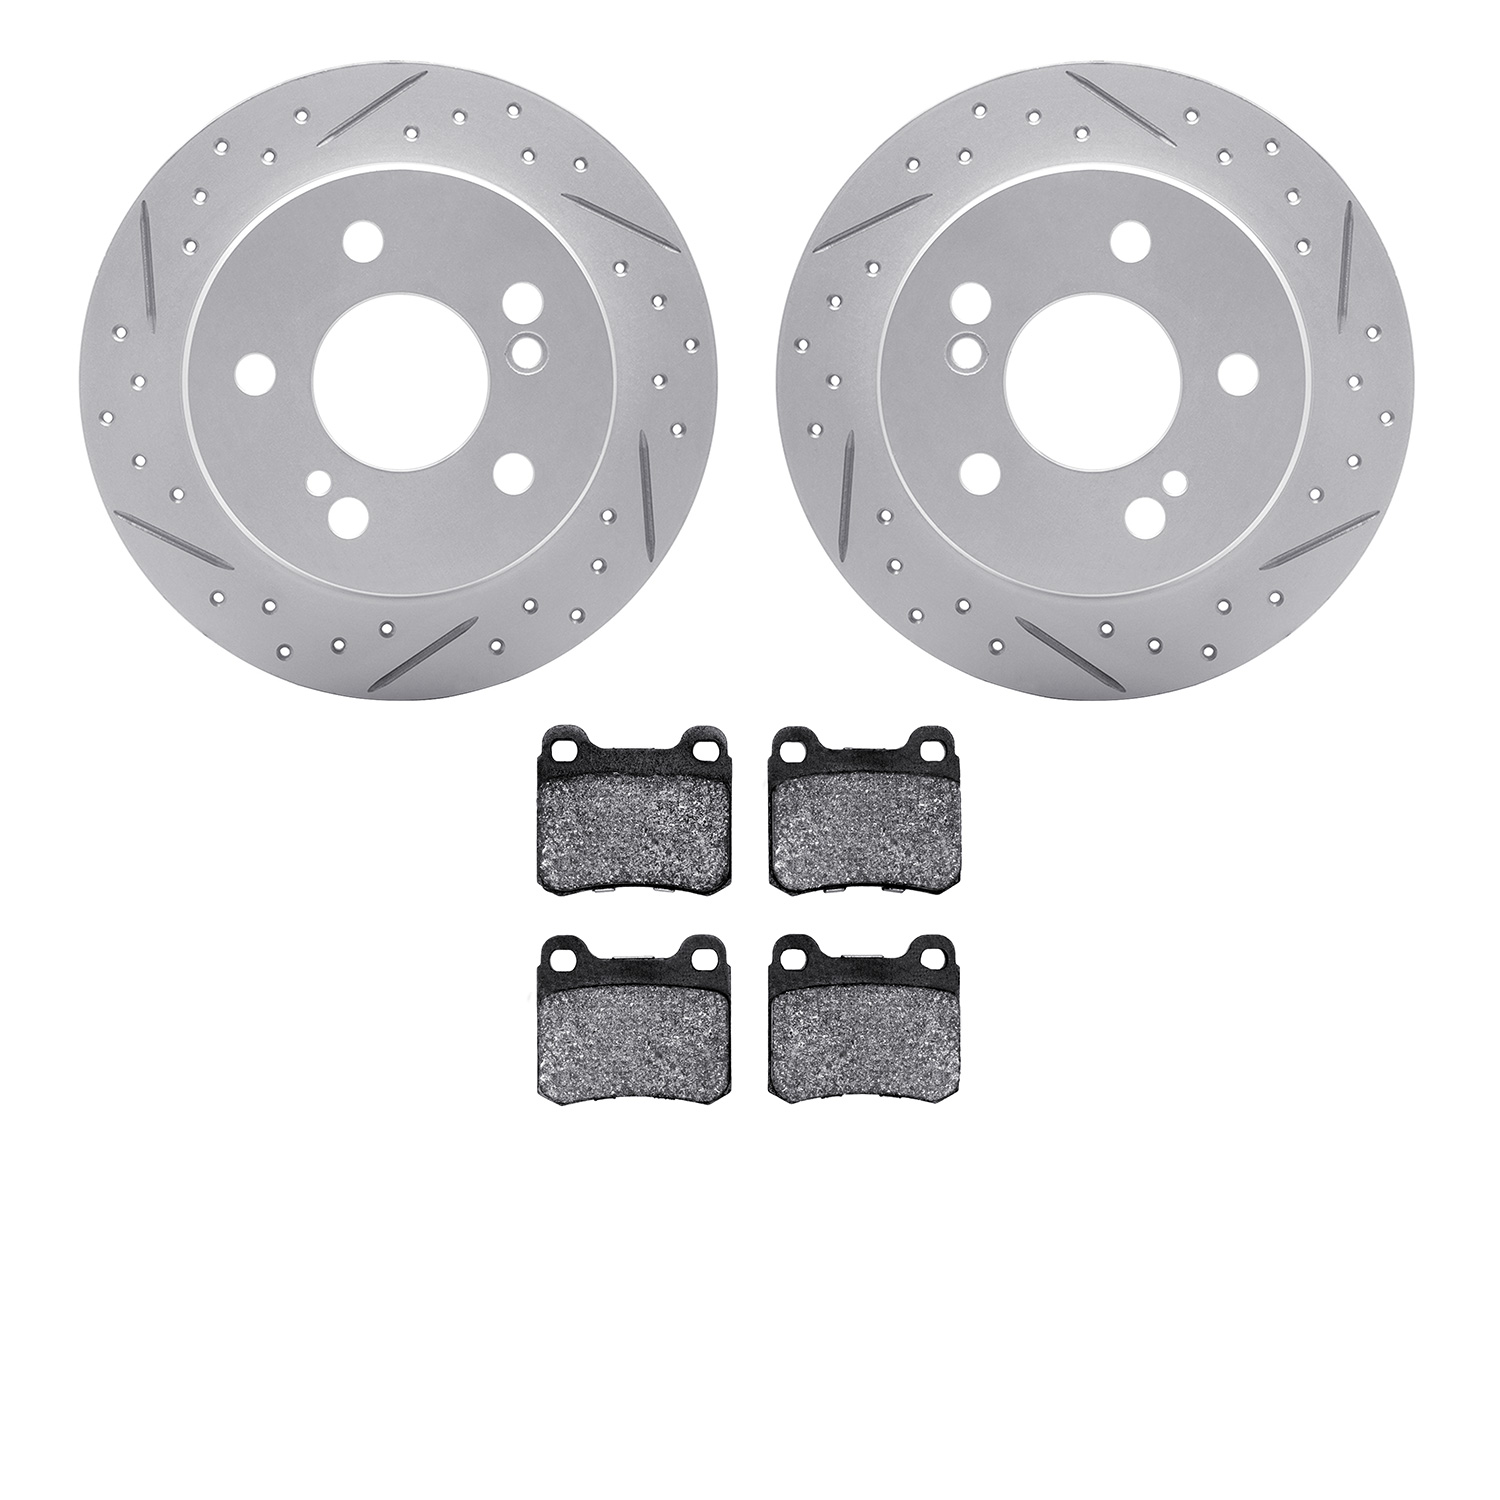 2502-63008 Geoperformance Drilled/Slotted Rotors w/5000 Advanced Brake Pads Kit, 1984-1995 Mercedes-Benz, Position: Rear